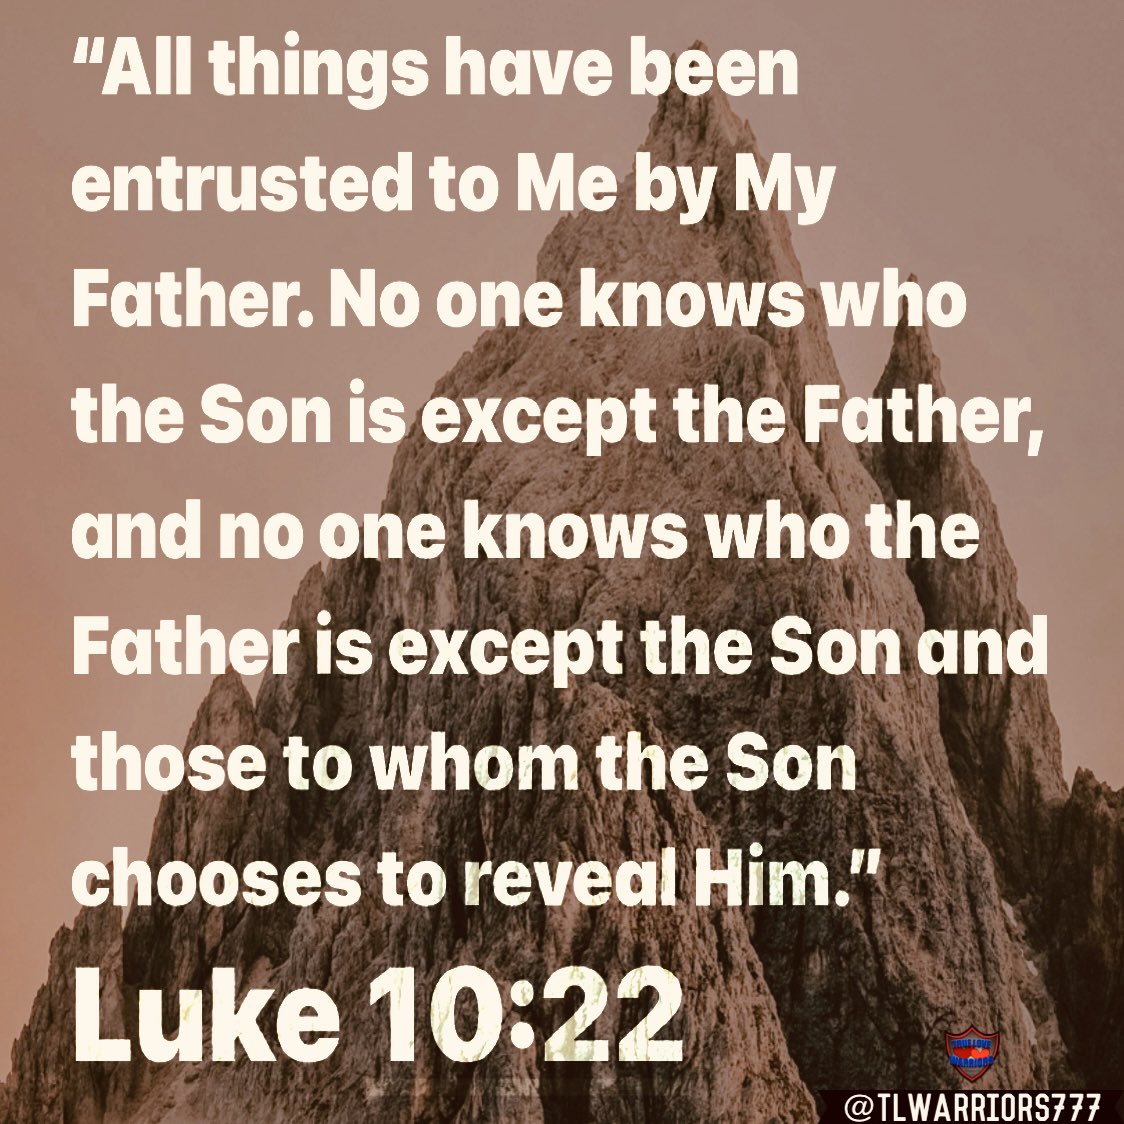 “All things have been entrusted to Me by My Father. No one knows who the Son is except the Father, and no one knows who the Father is except the Son and those to whom the Son chooses to reveal Him.” Luke 10:22